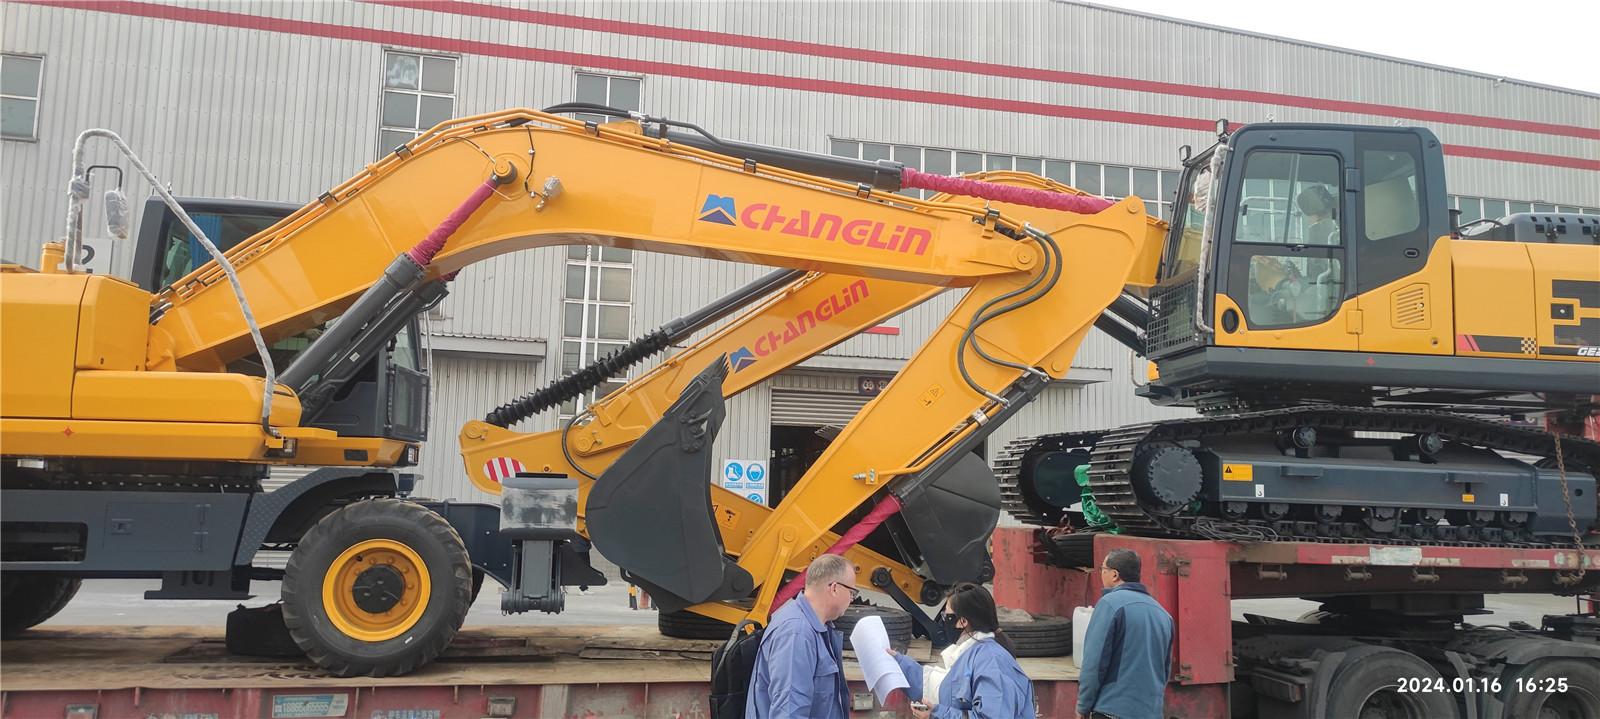 Changlin GHT215W Hydraulic Wheeled Excavator - Power and Precision Combined (18)i30